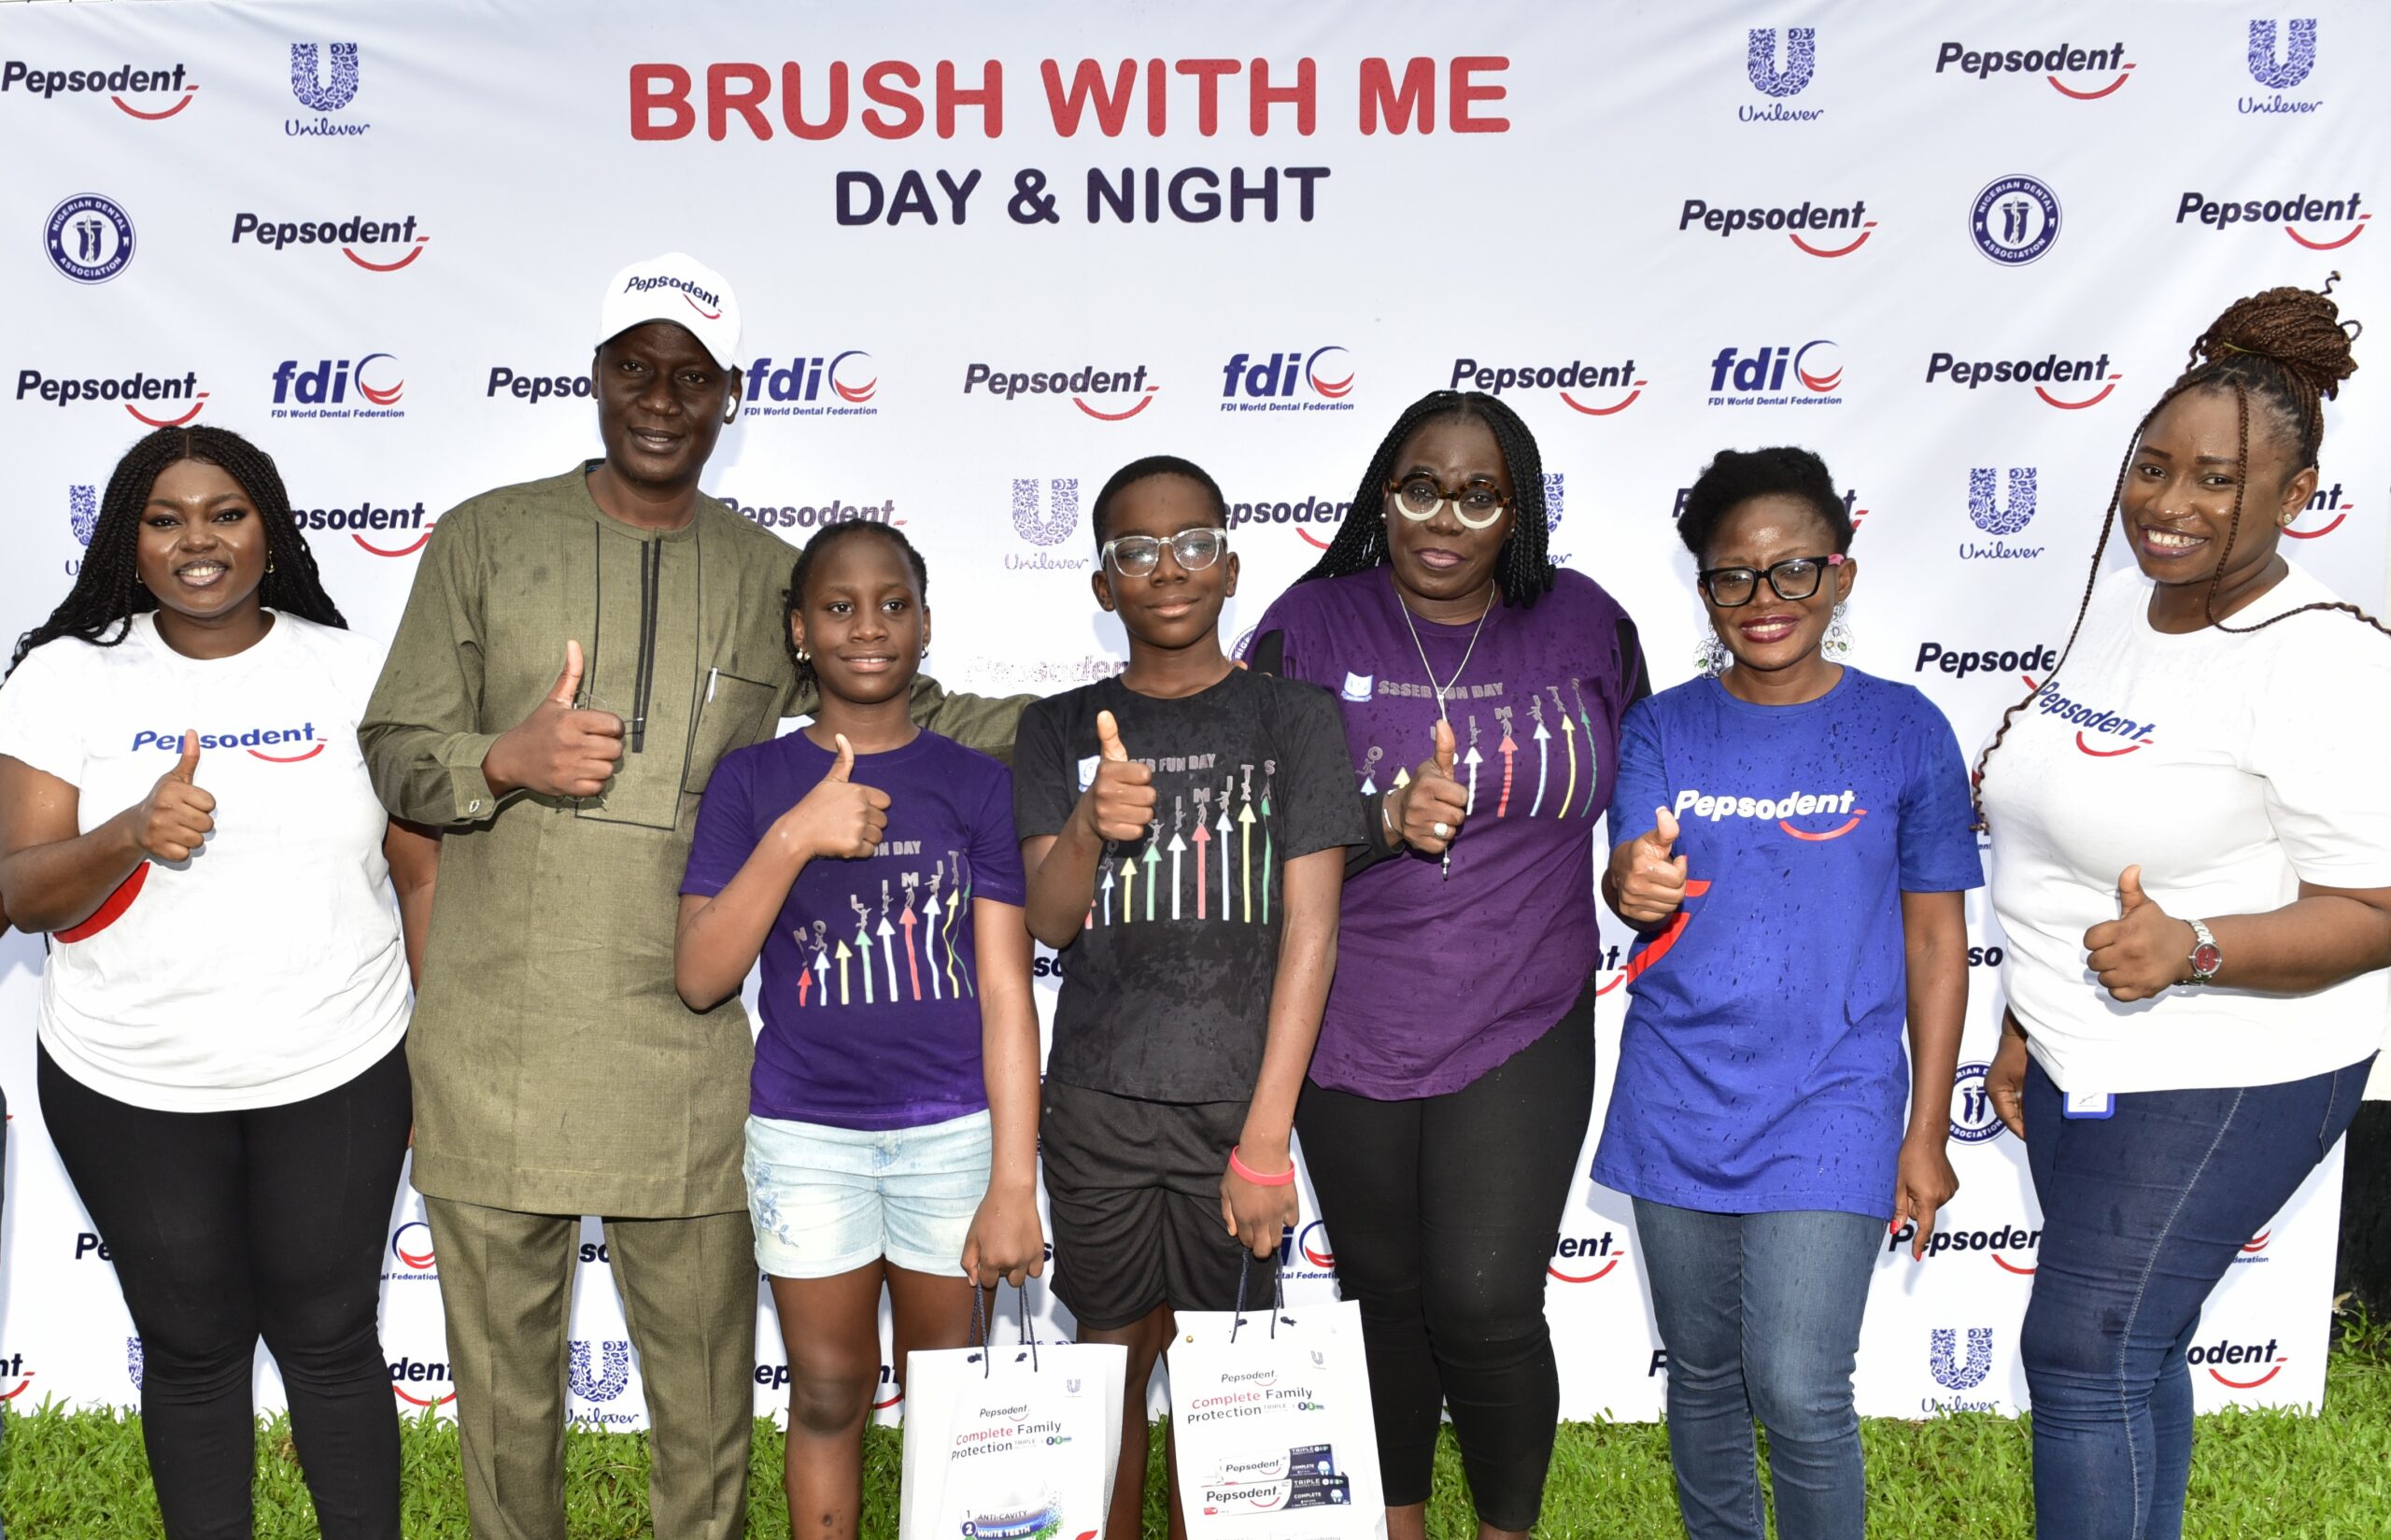 L-R: Category Manager, Oral Care, Unilever Nigeria, Eva Ogudu; Chairman, Nigerian Dental Association, Lagos Chapter, Dr. Oluwole Olusanya; a pupil of St. Saviour Nursery/Primary School, Tinuola Badmus; another pupil, Sitonna Emodi; Head Teacher, St. Savior Nursery/Primary School, Lawrencia Izedonmwen; Business Lead, Beauty & Personal Care, Unilever Nigeria, Oiza Gyang, and Assitant Category Manager, Oral Care, Unilever Nigeria, Chononyerem Opara during the launch of the Pepsodent Schools Program held in Lagos recently.